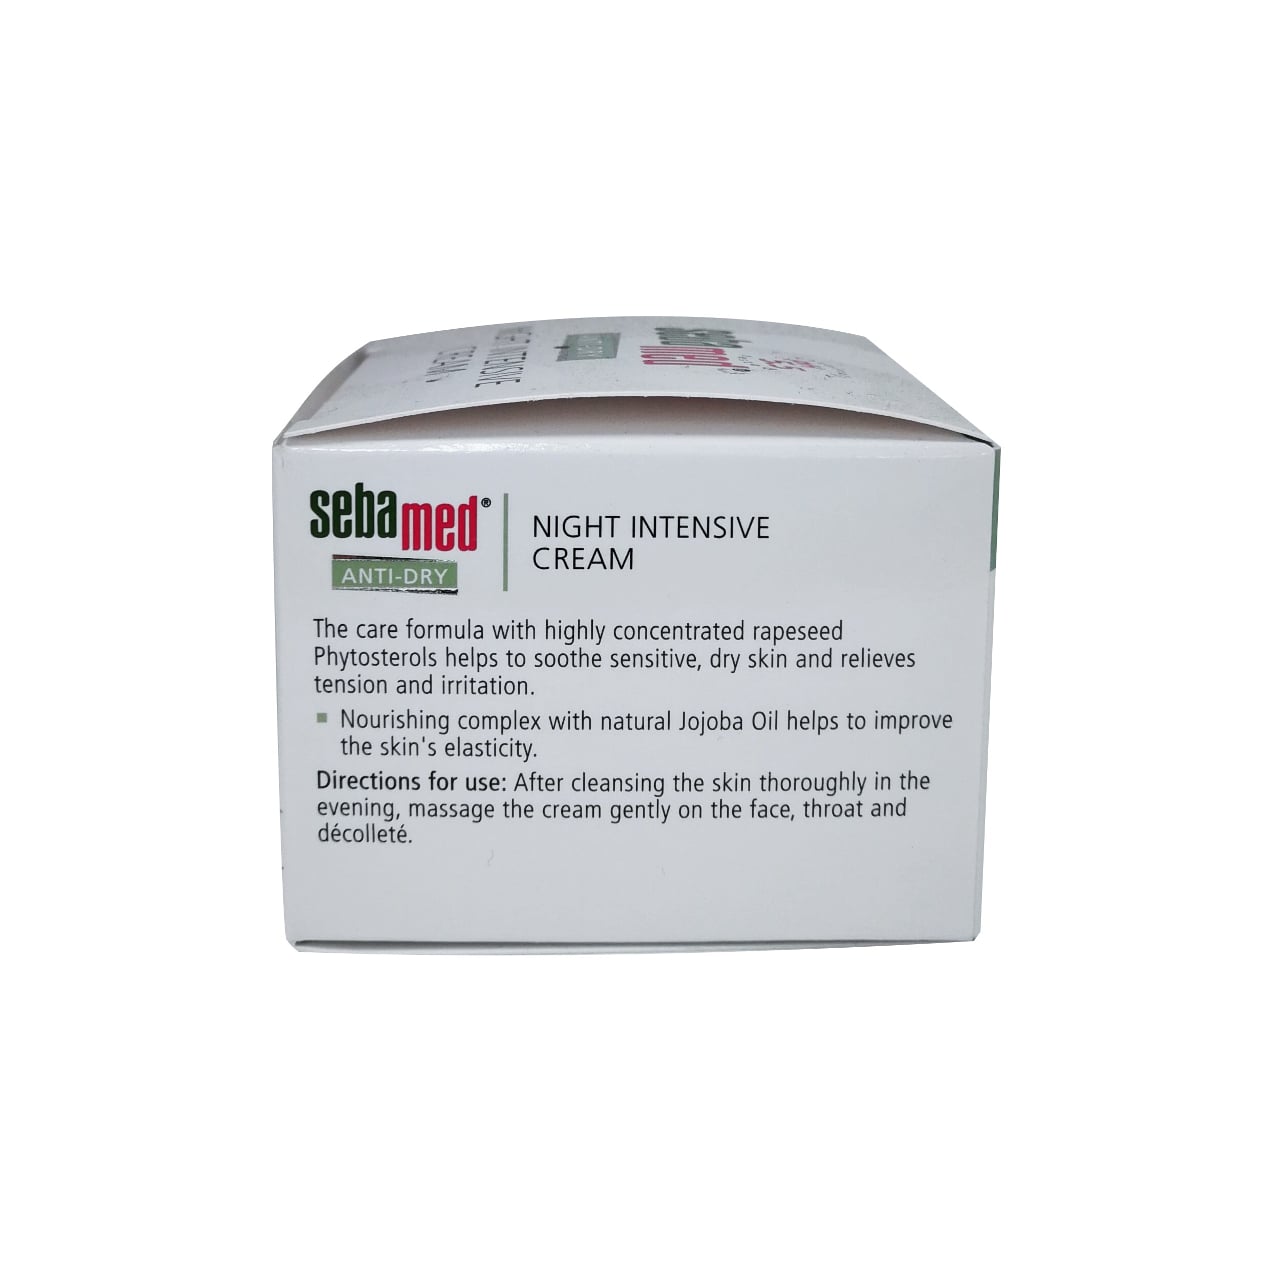 Product details for Sebamed Anti-Dry Night Intensive Cream 2 of 2